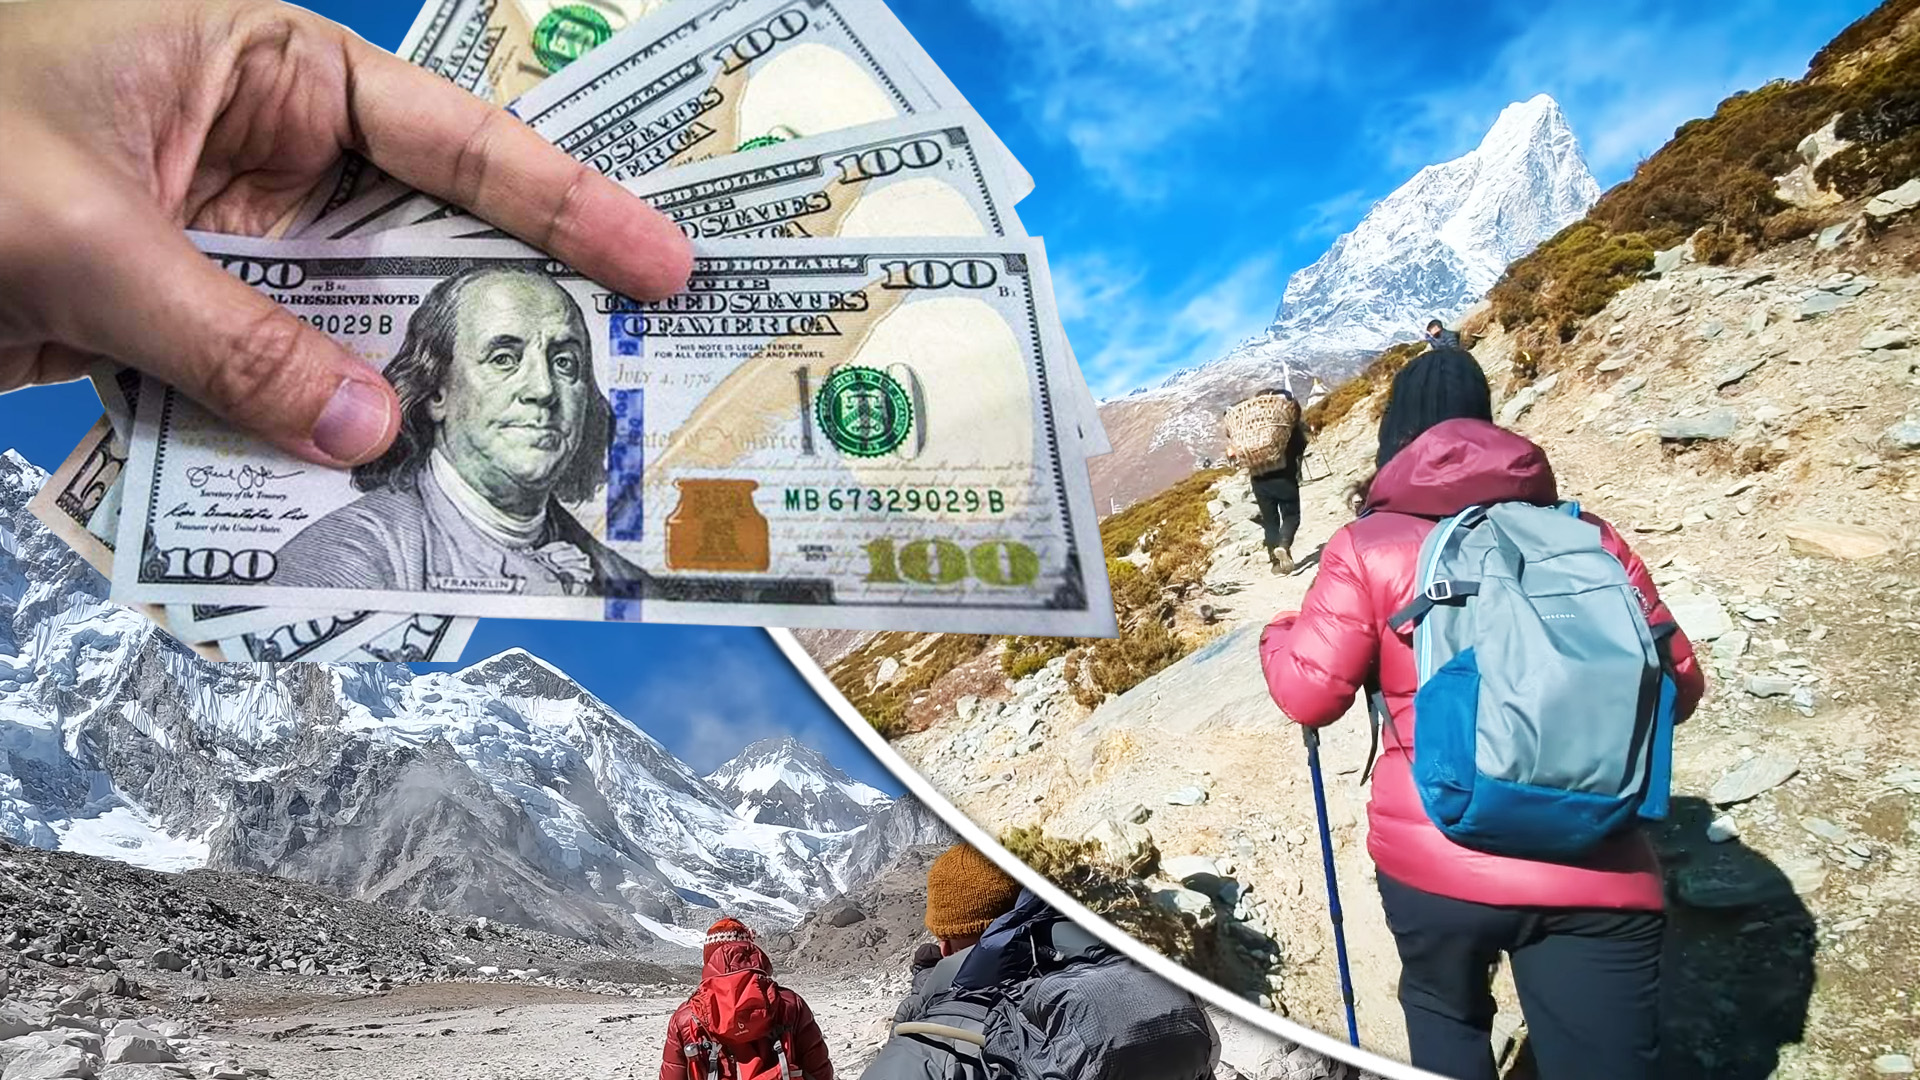 How much does the Everest Base Camp Trek cost?